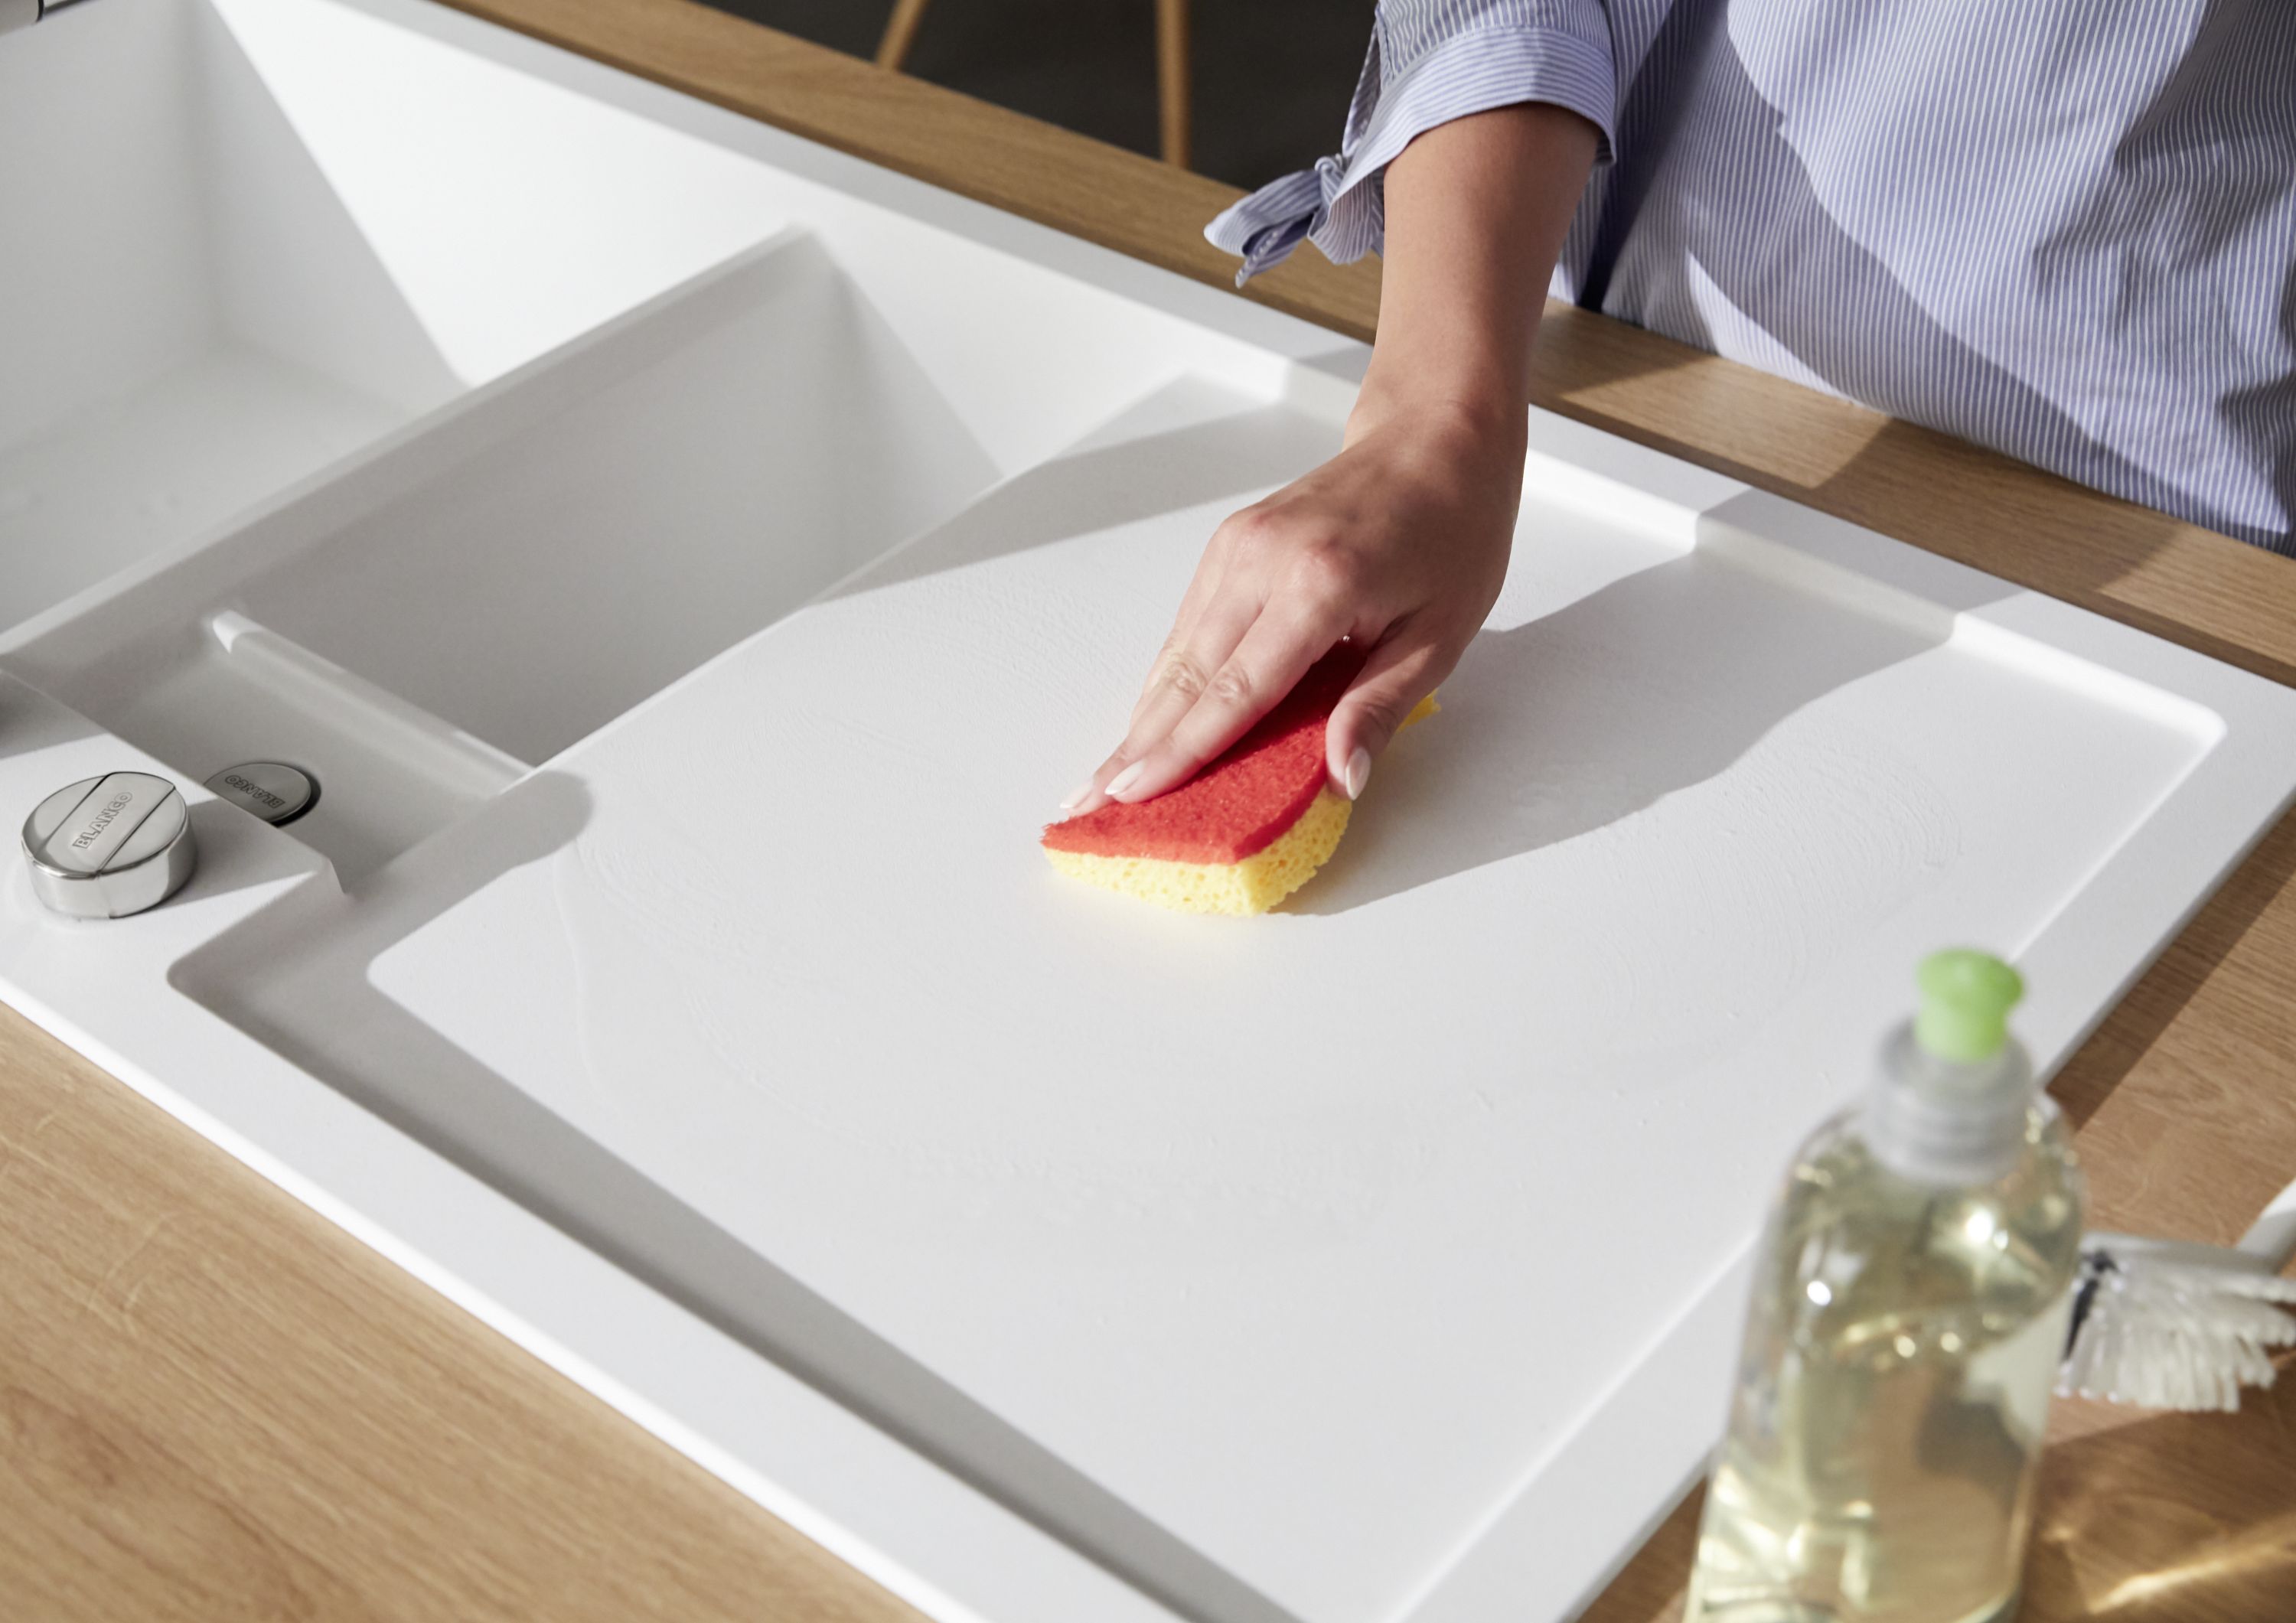 A Silgranit sink is cleaned with a sponge